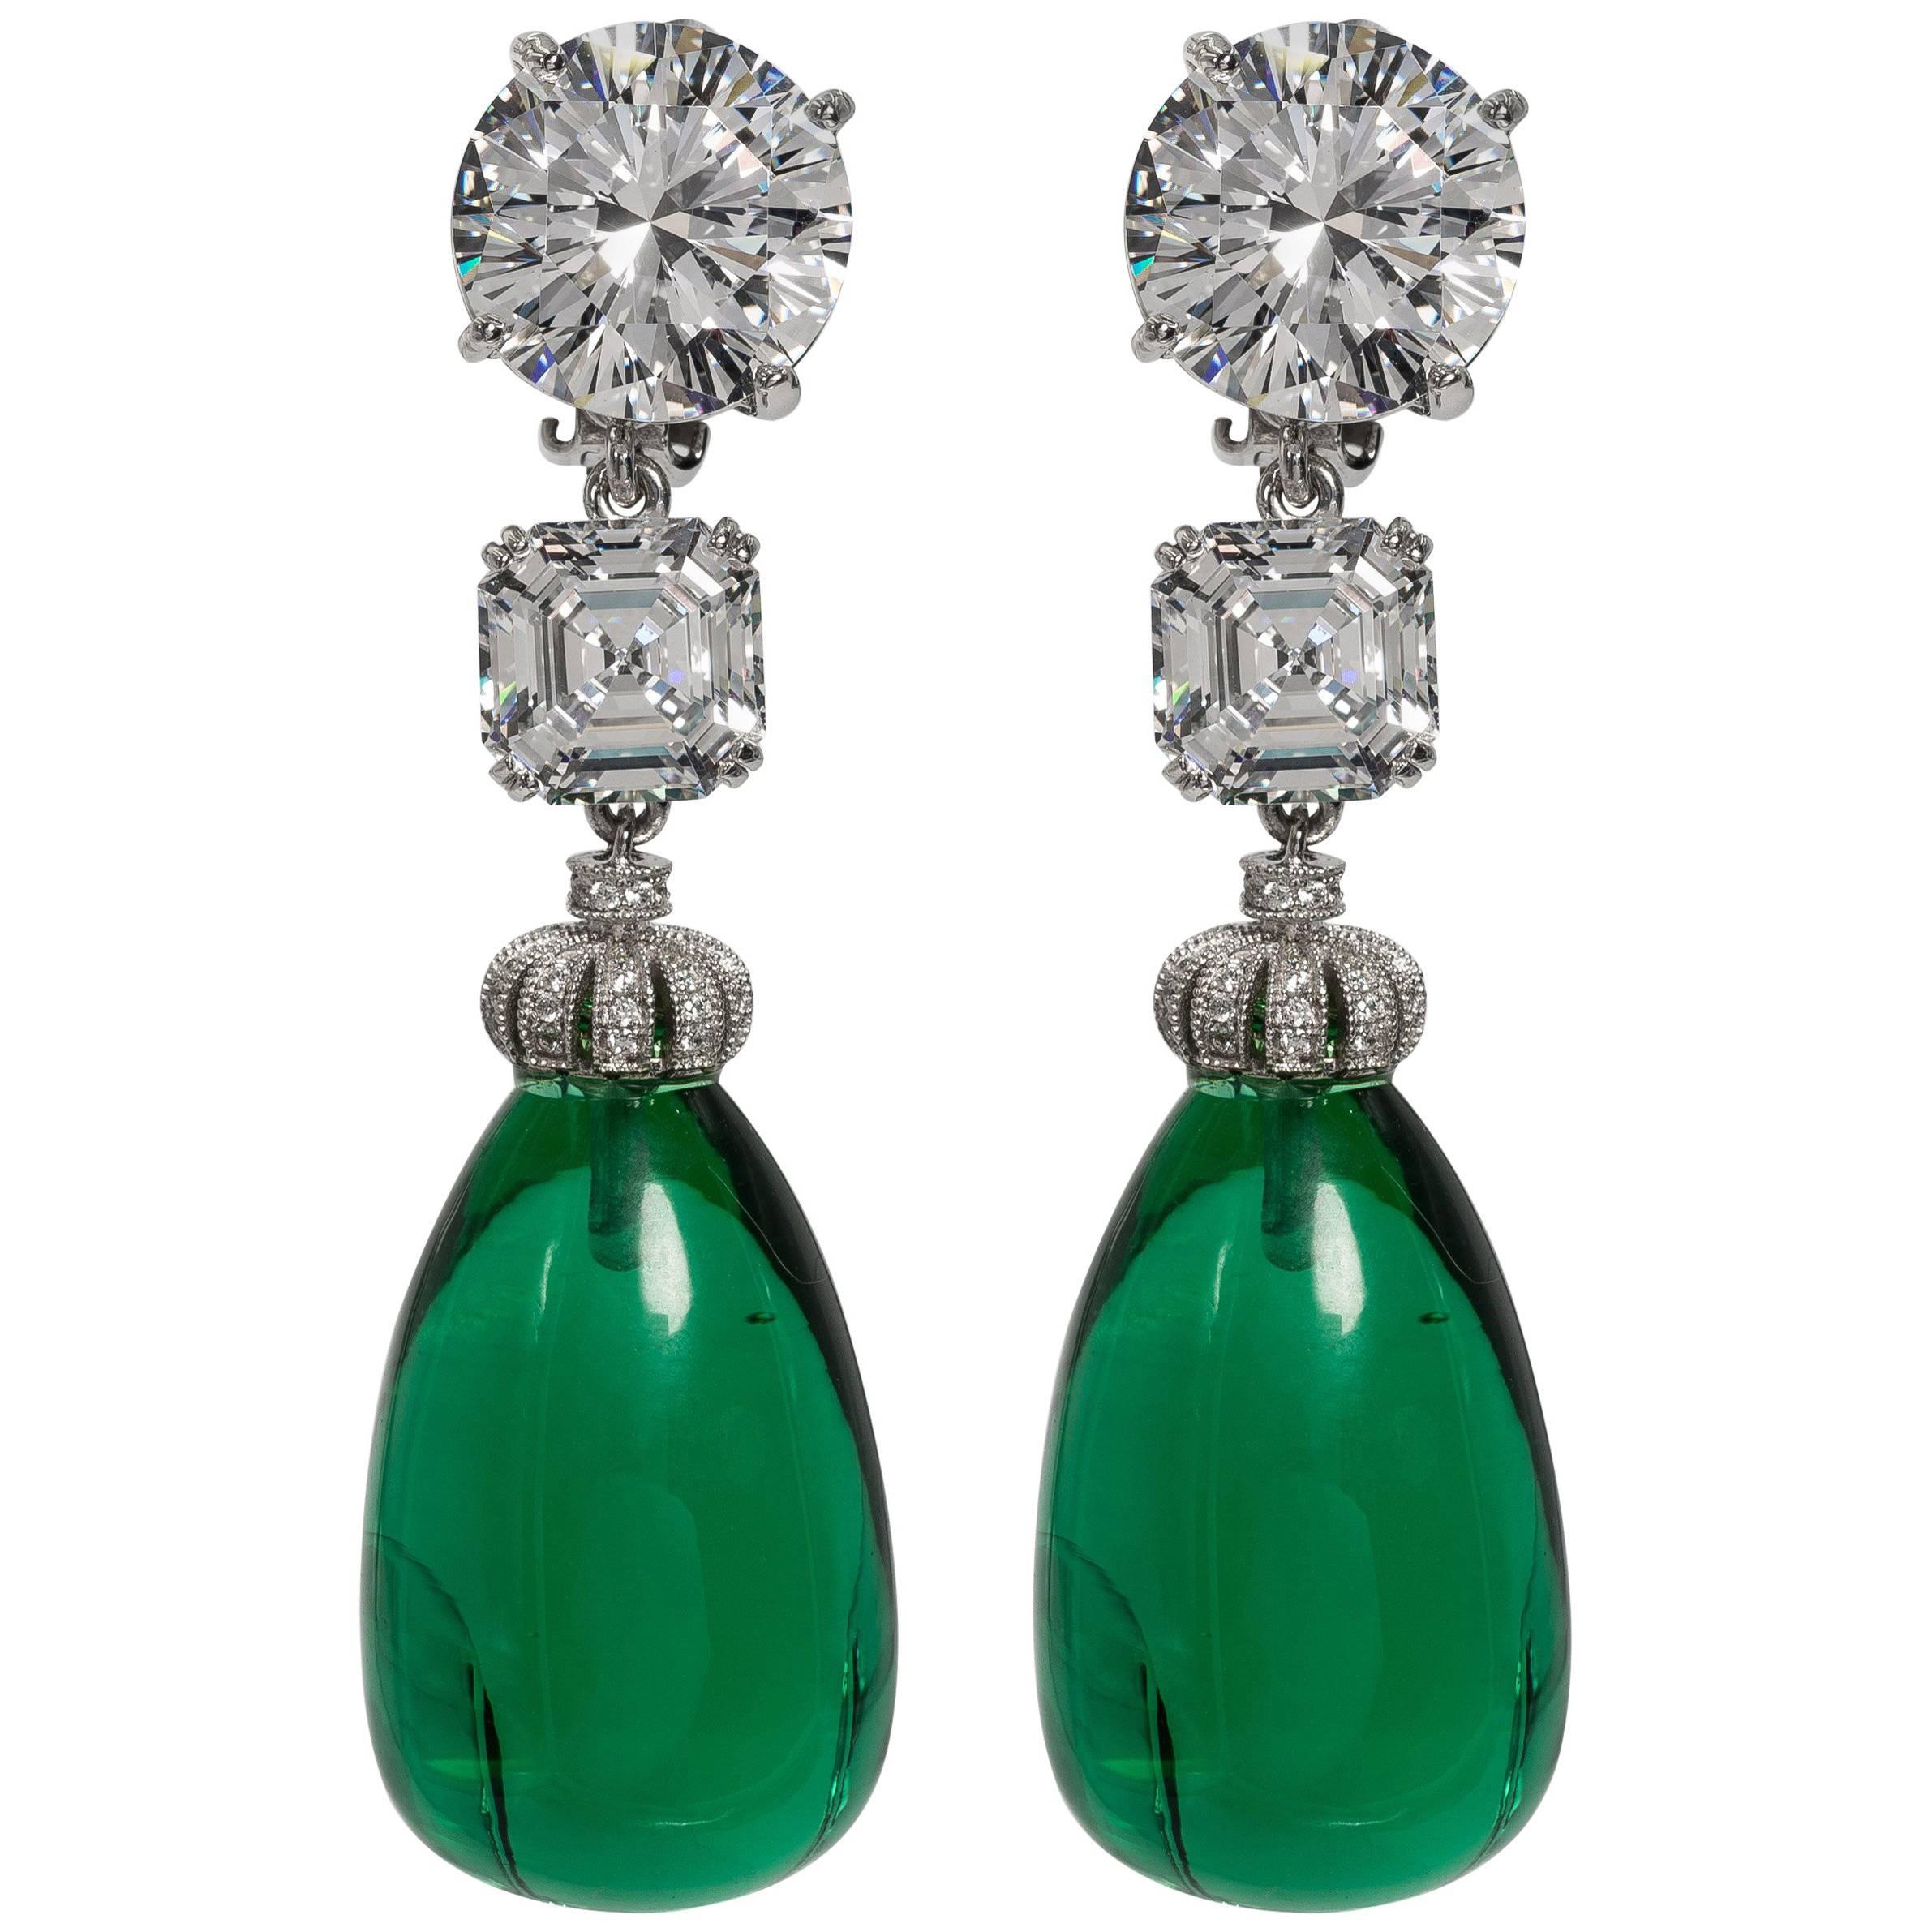 Magnificent Costume Jewelry Diamond Large Cabochon Emerald Drop Earrings